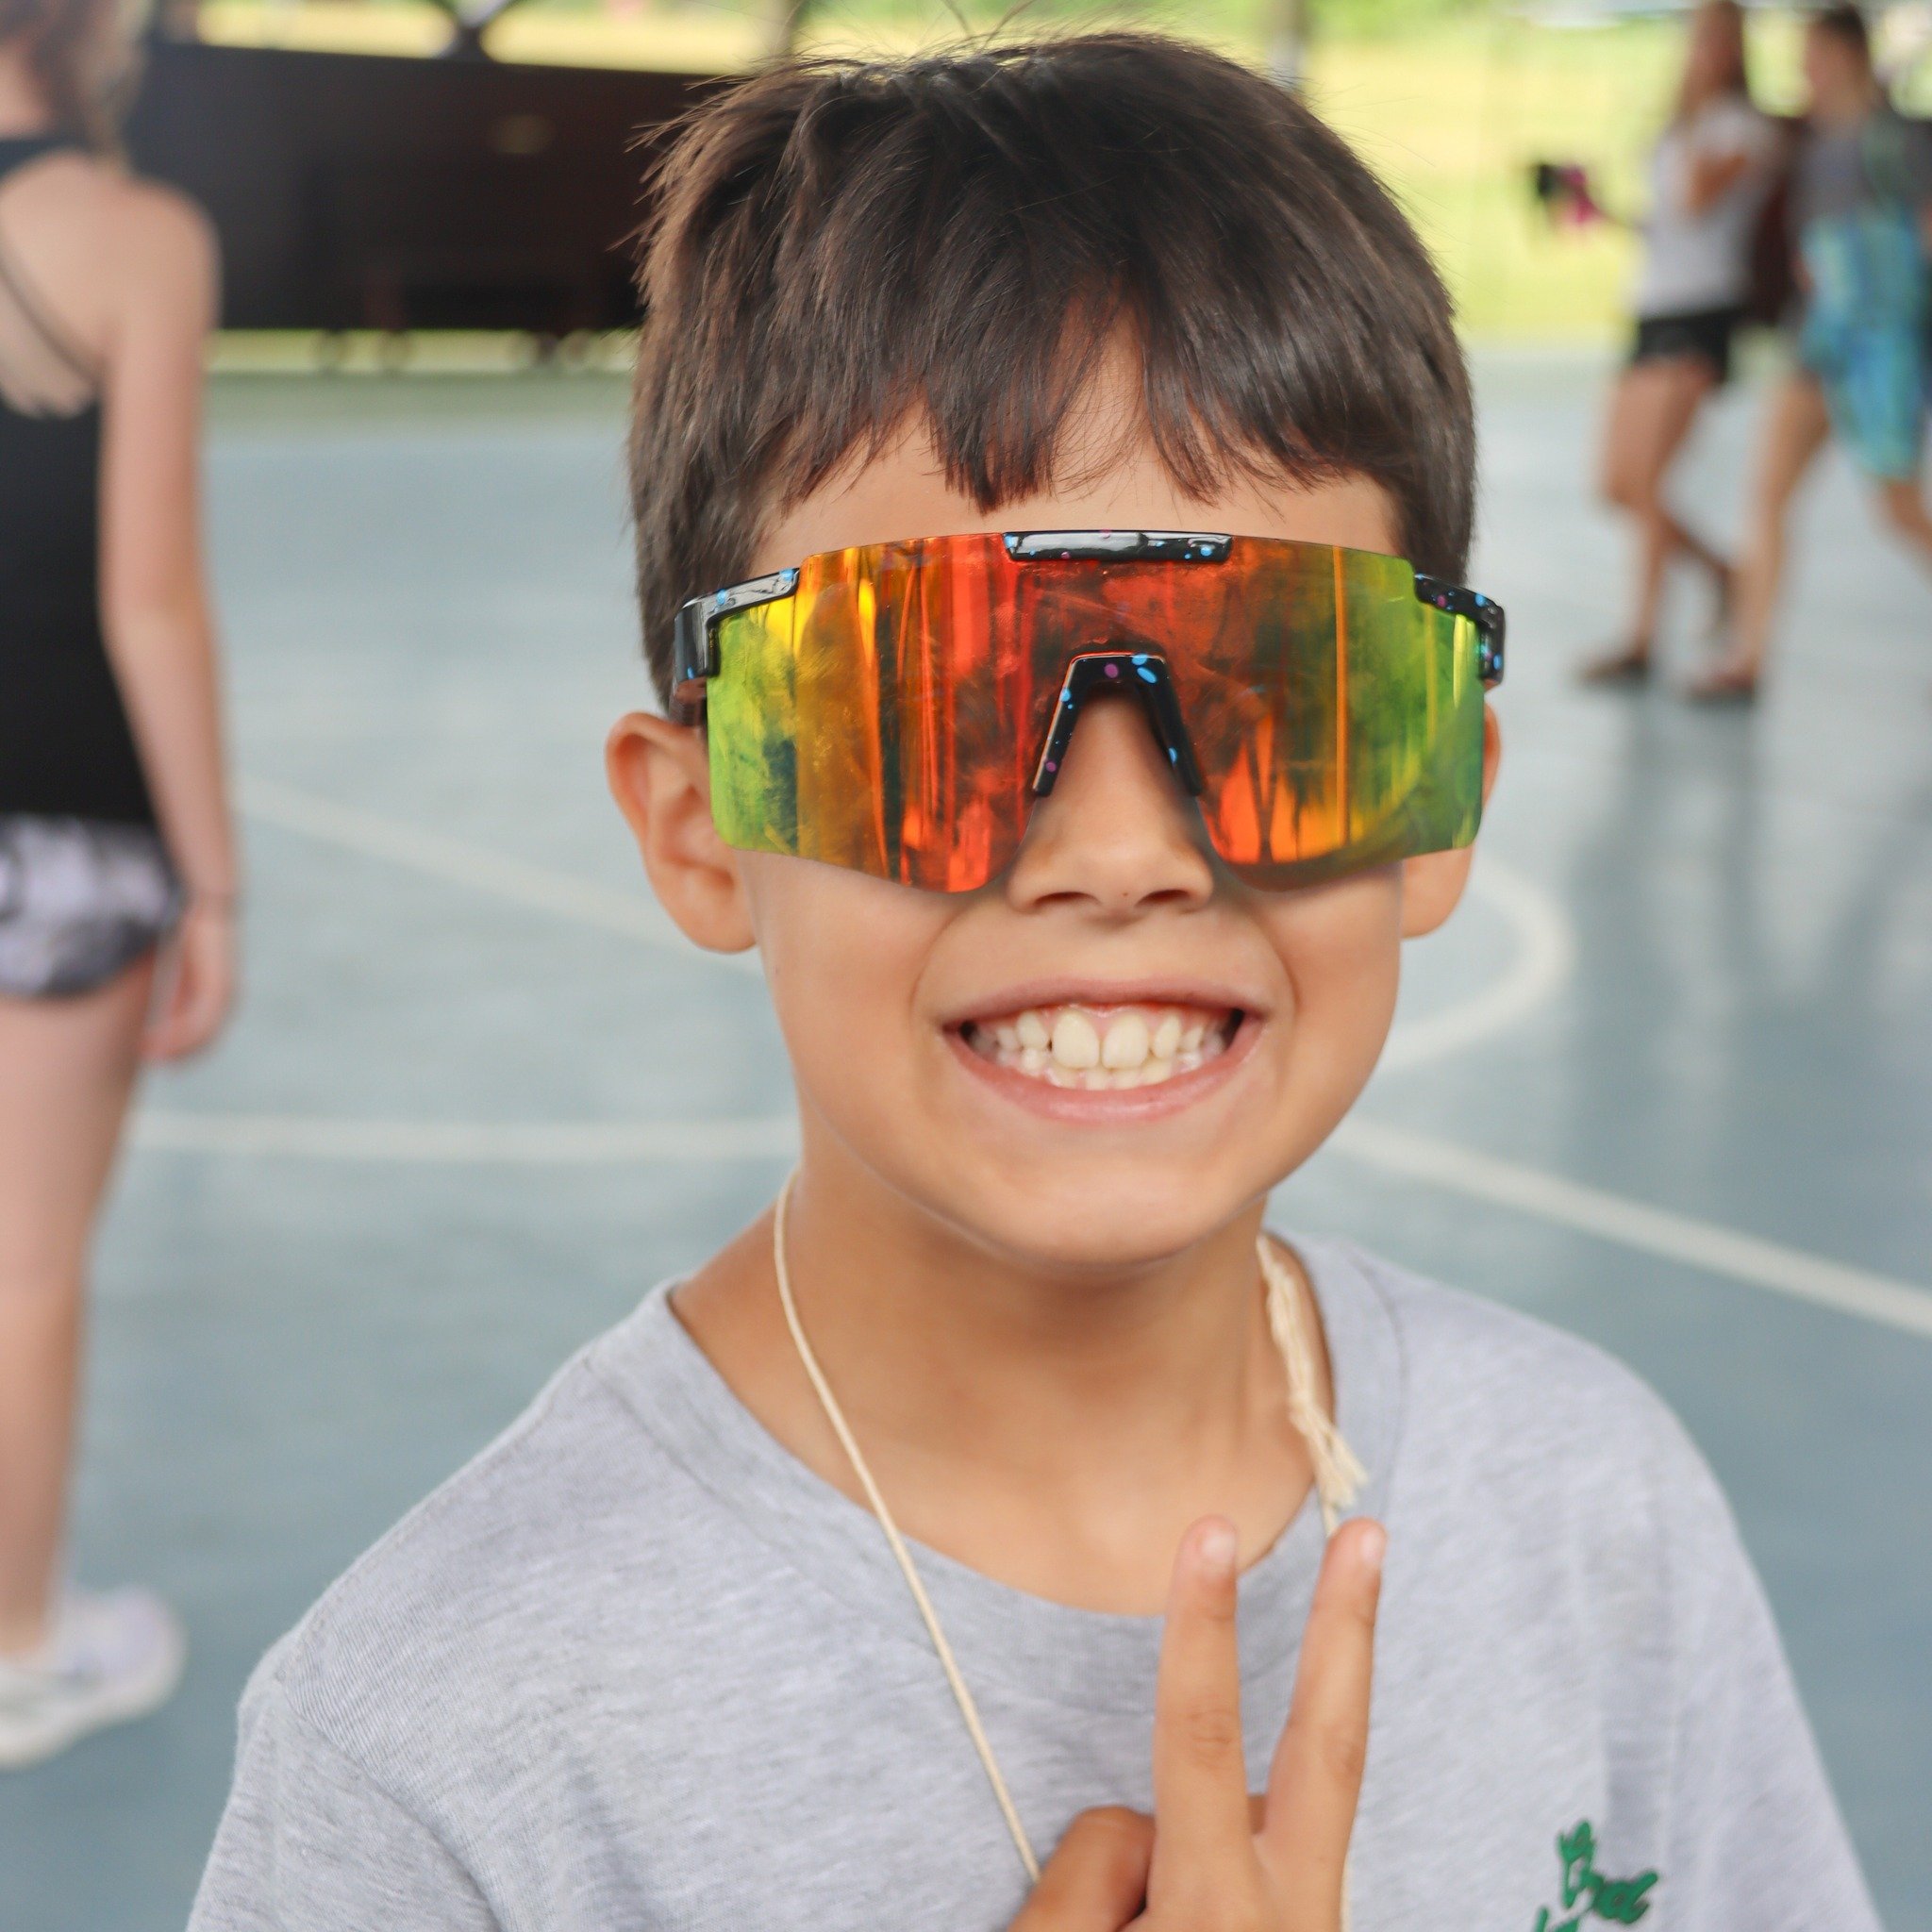 Smiling big, only 21 days until our first campers arrive! ✨🌲

🏕️ We're gearing up for an incredible summer at Camp Arrowwood! From Gaga Ball to campfires and everything in between, get ready for the best summer yet. 🎉 

Comment below and let us kn